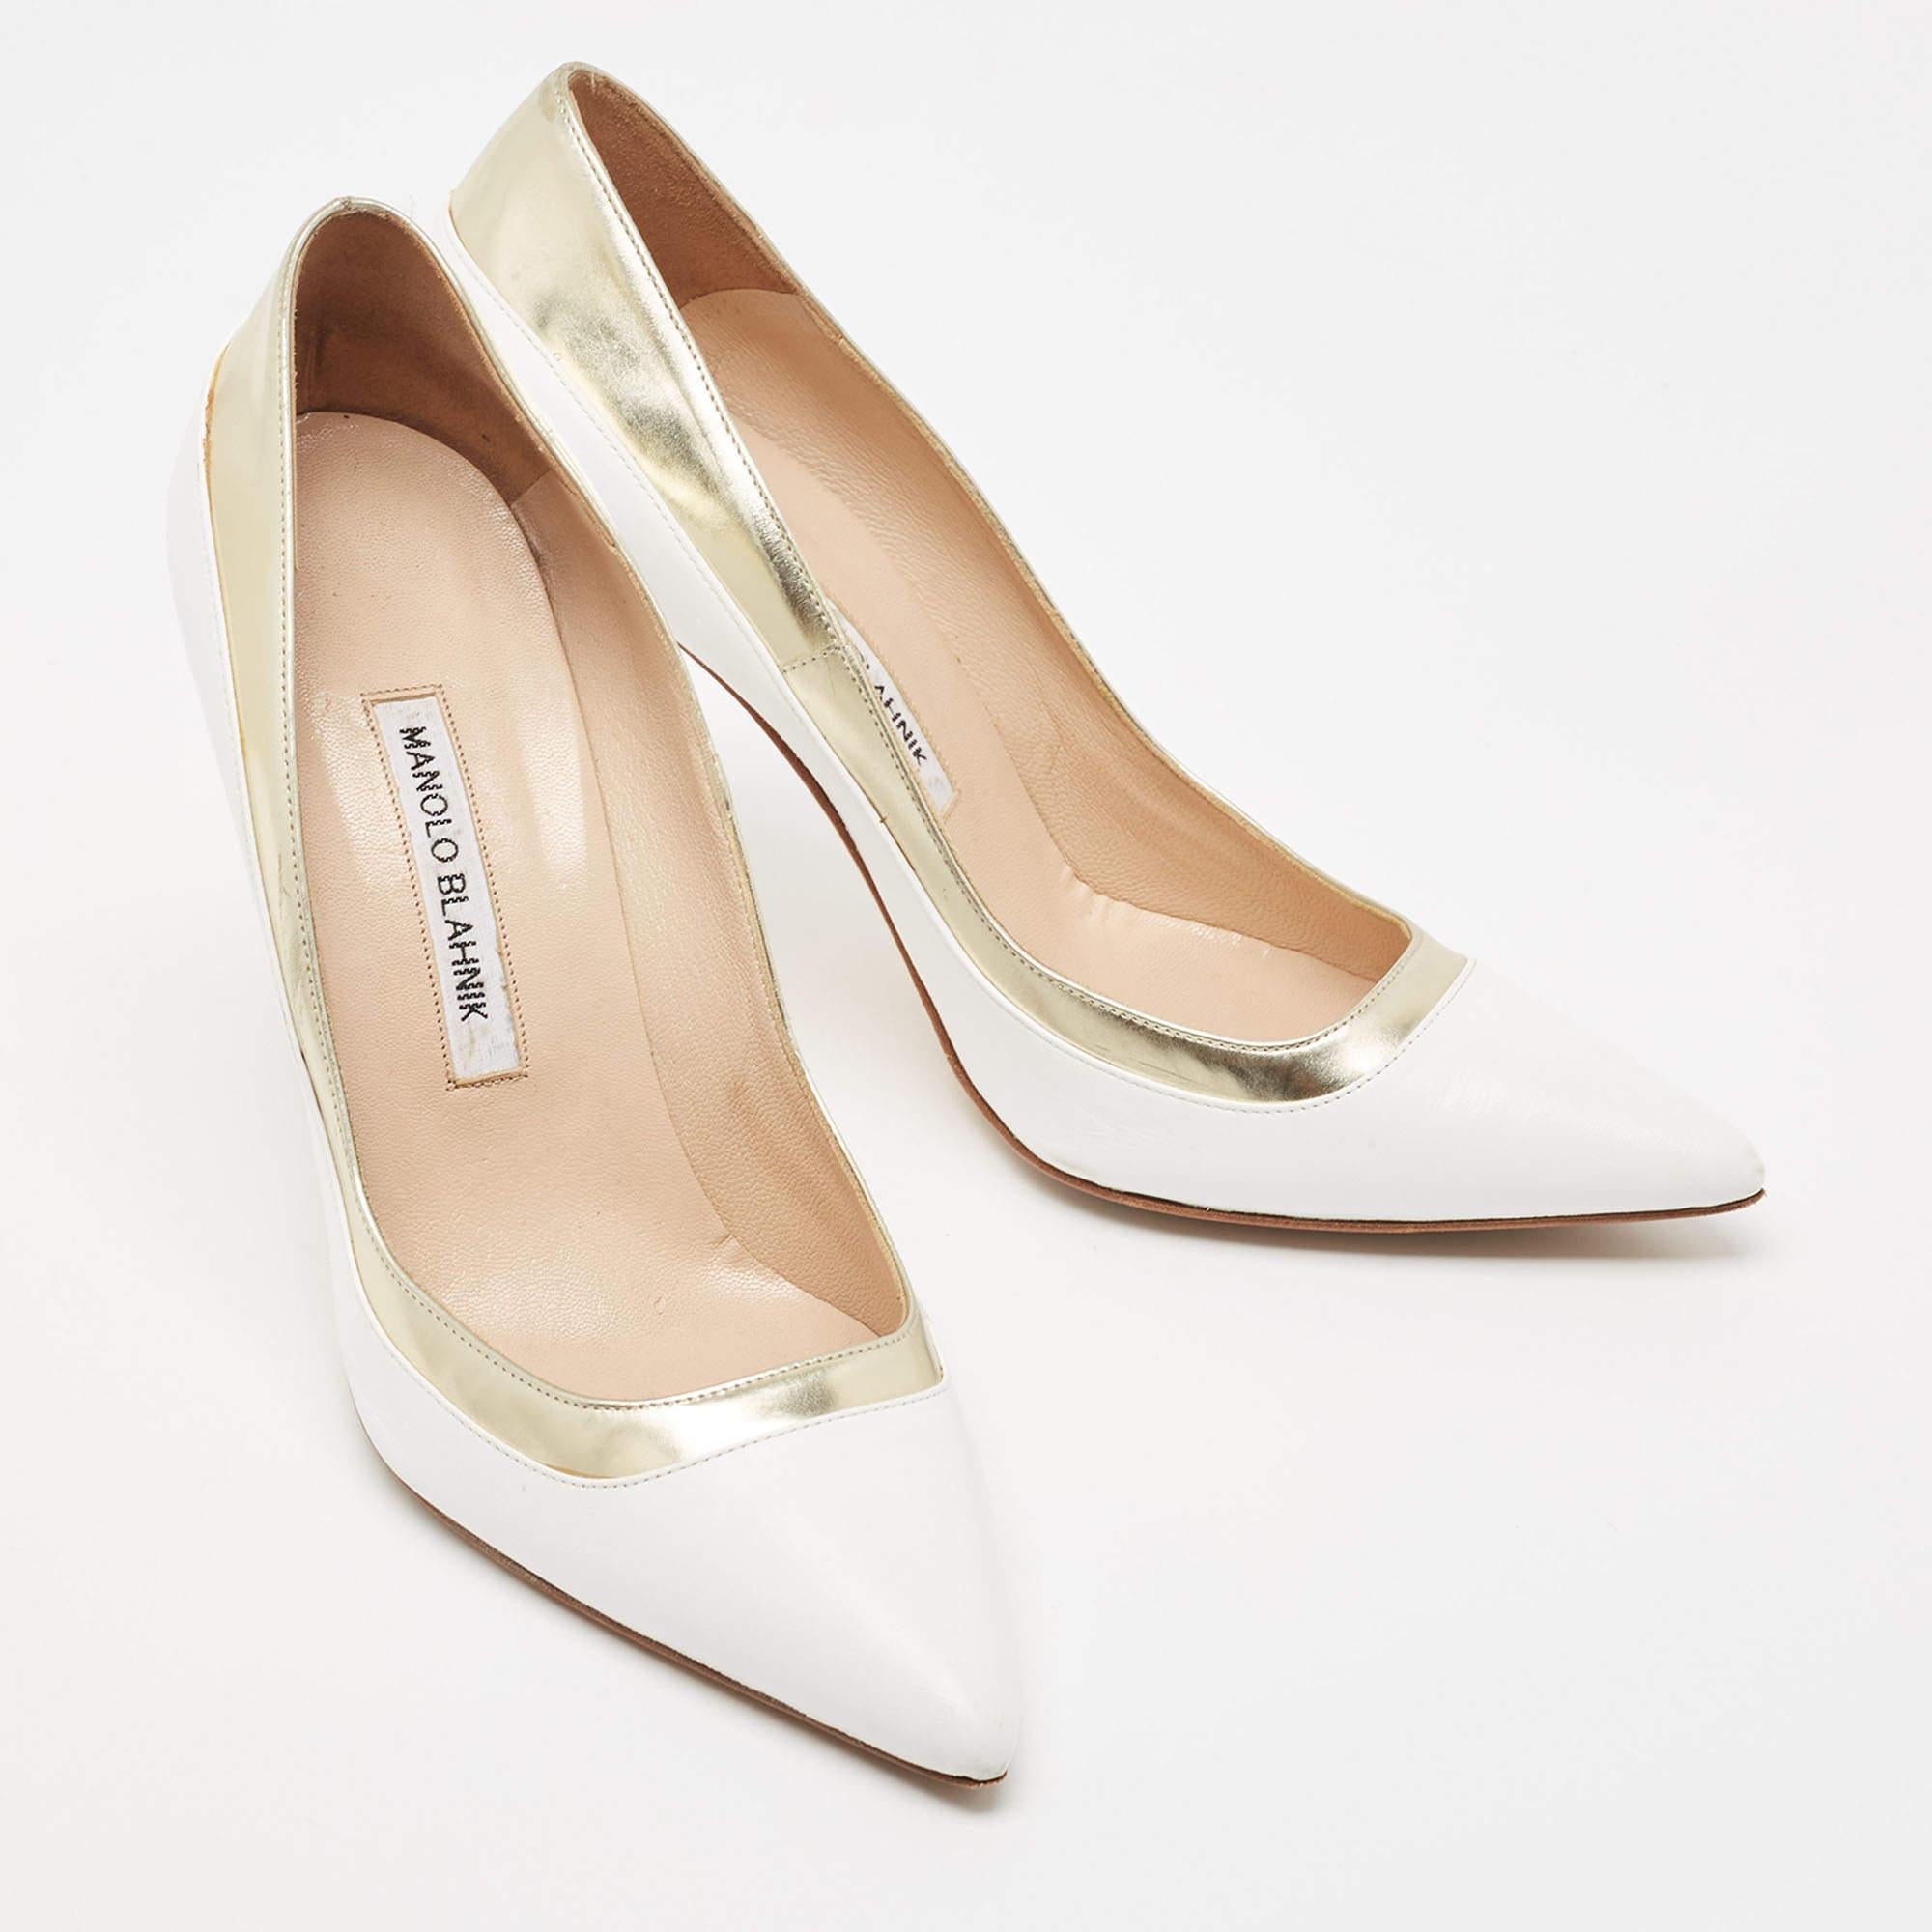 Manolo Blahnik White/Gold Leather Pointed Toe Pumps Size 40 3